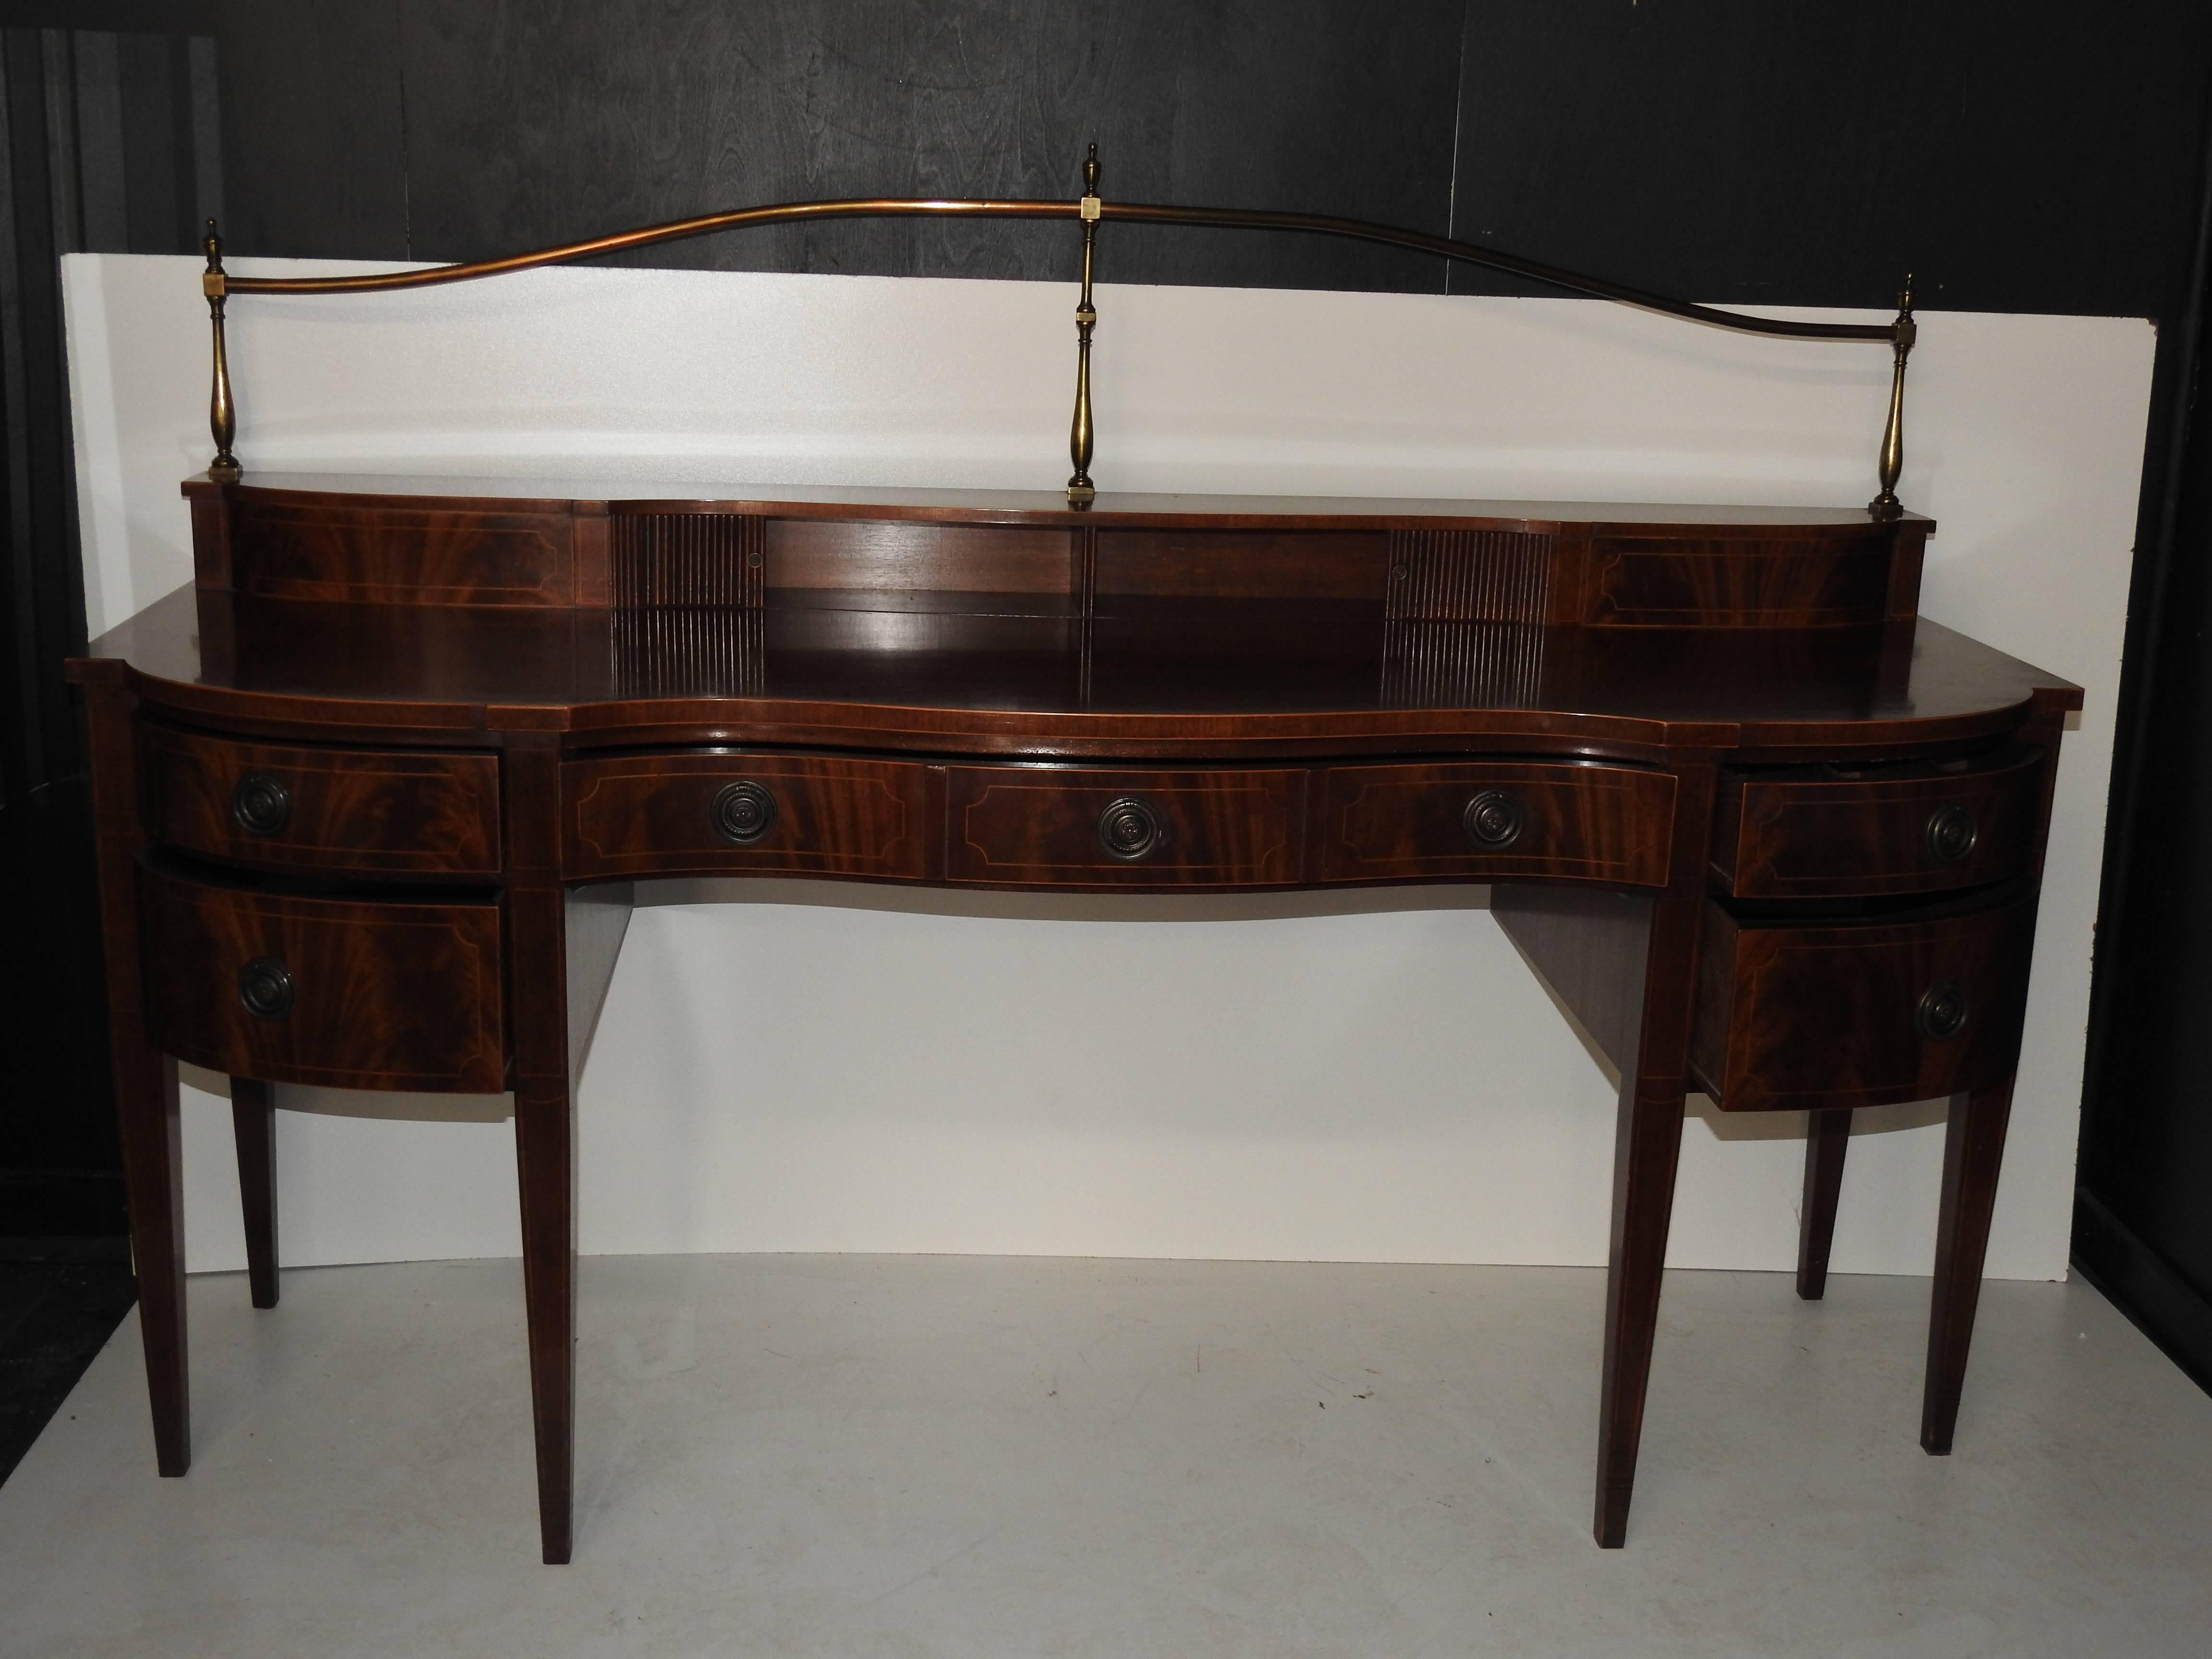 20th Century Georgian Style Inlaid Sideboard with Brass Gallery Super Structure by Baker For Sale